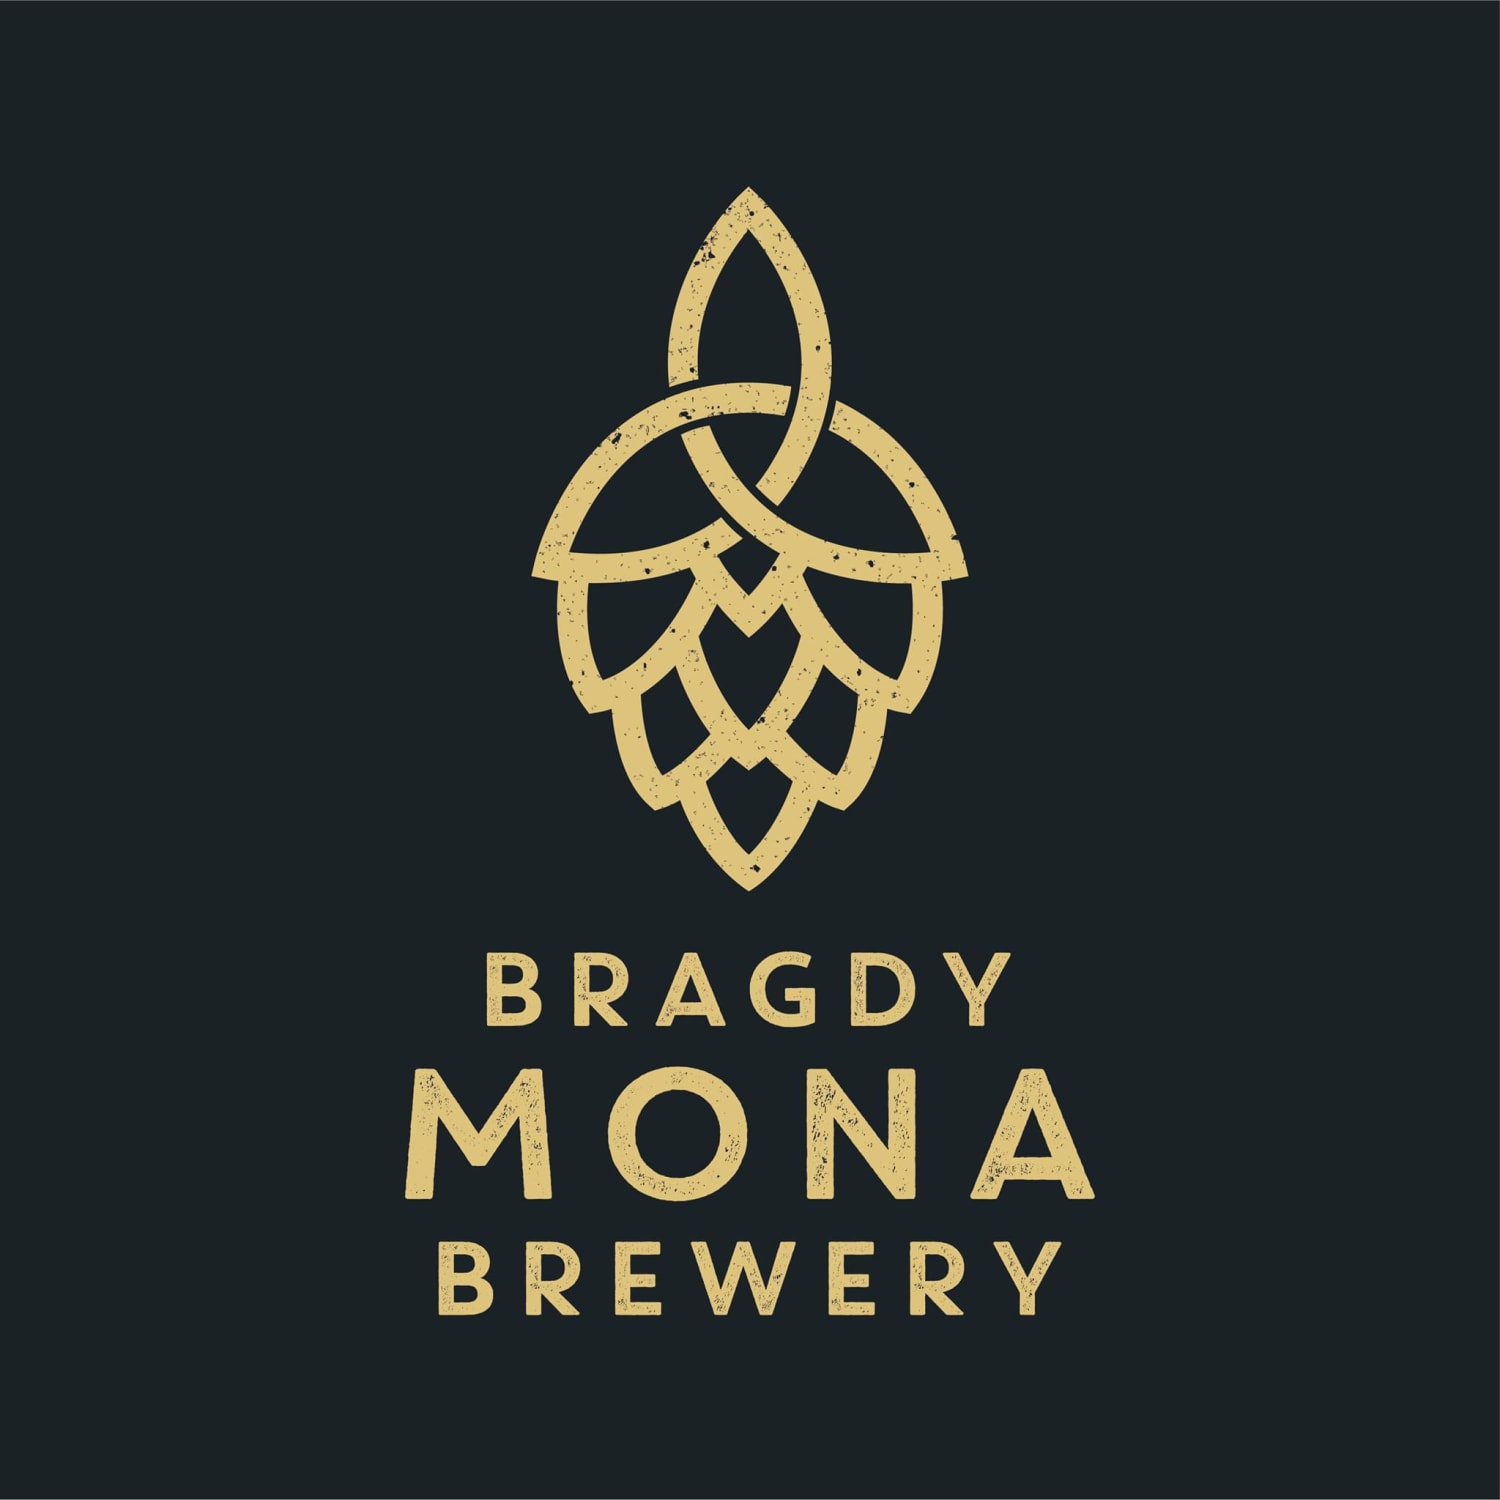 Here’s the logo of a local brewery near me here in Wales which blends in a Celtic triquerta.